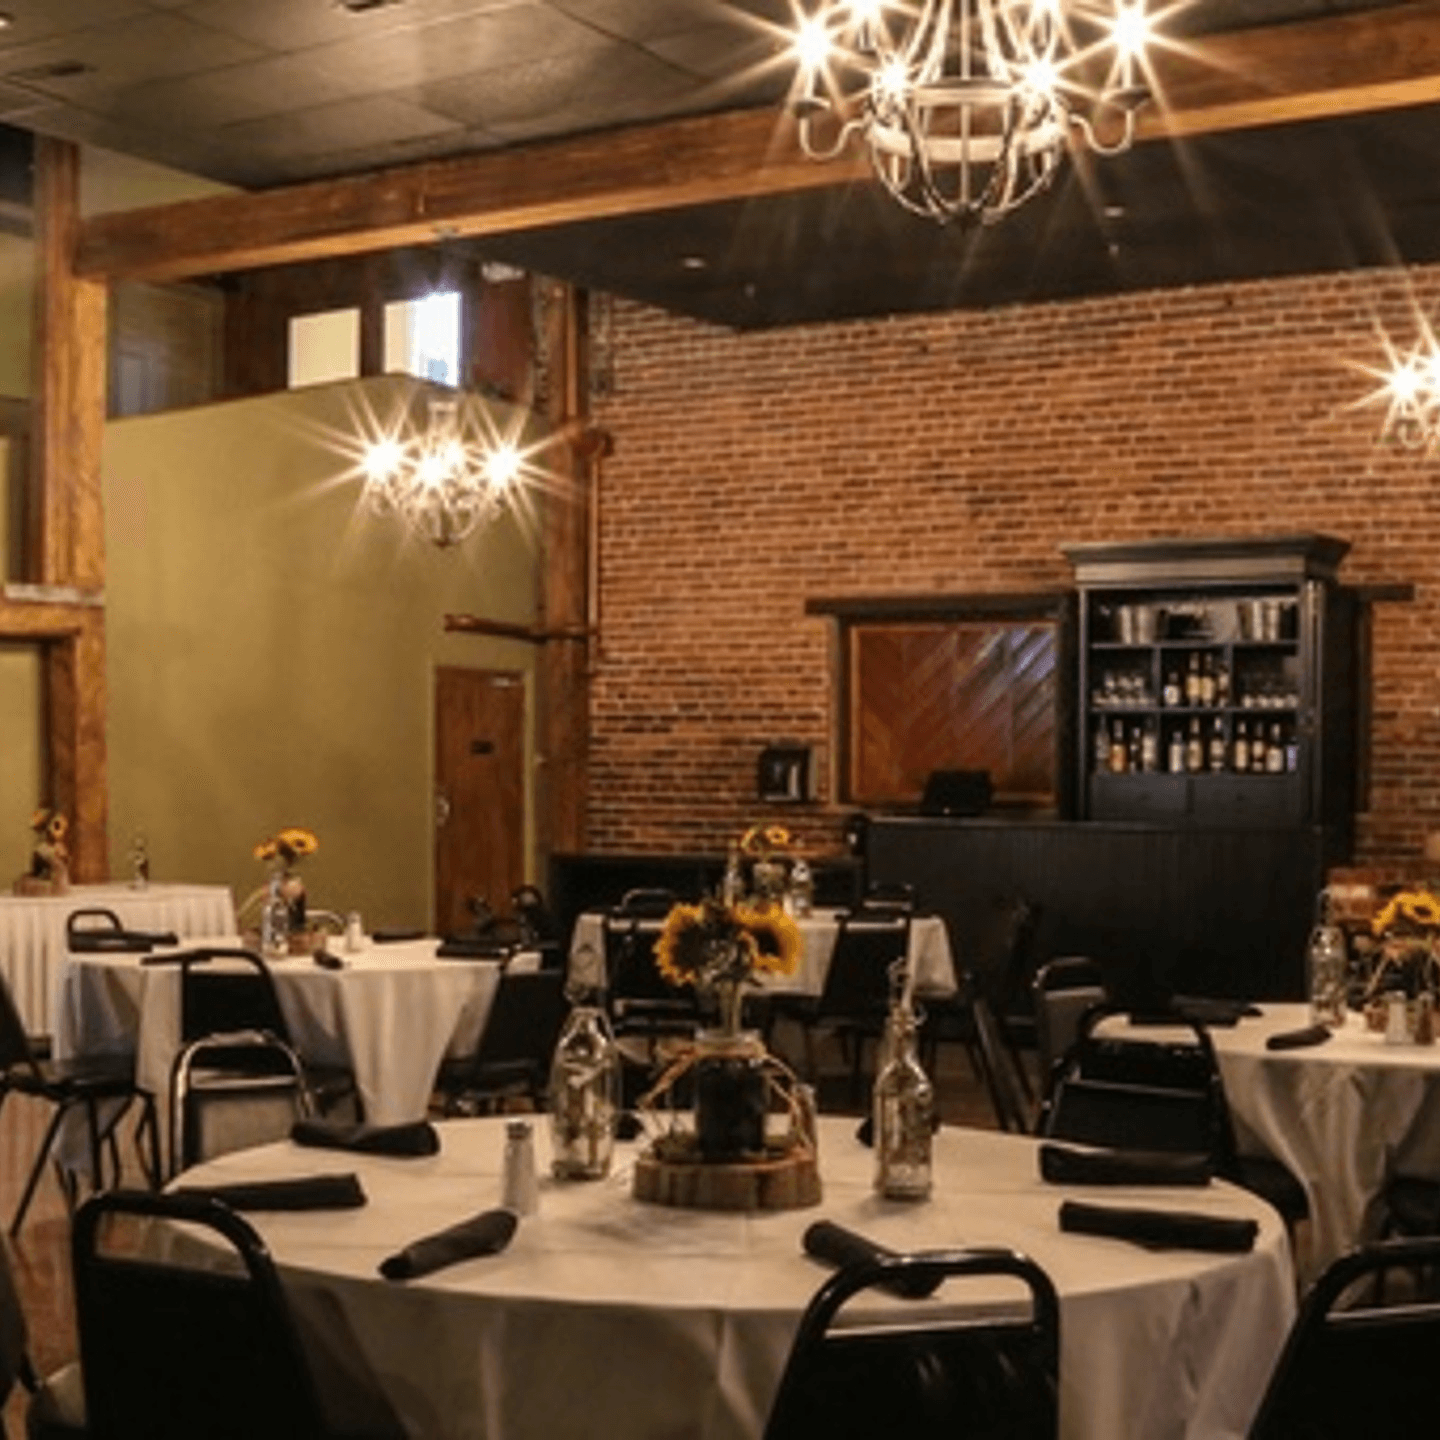 BANQUETS & PRIVATE DINING